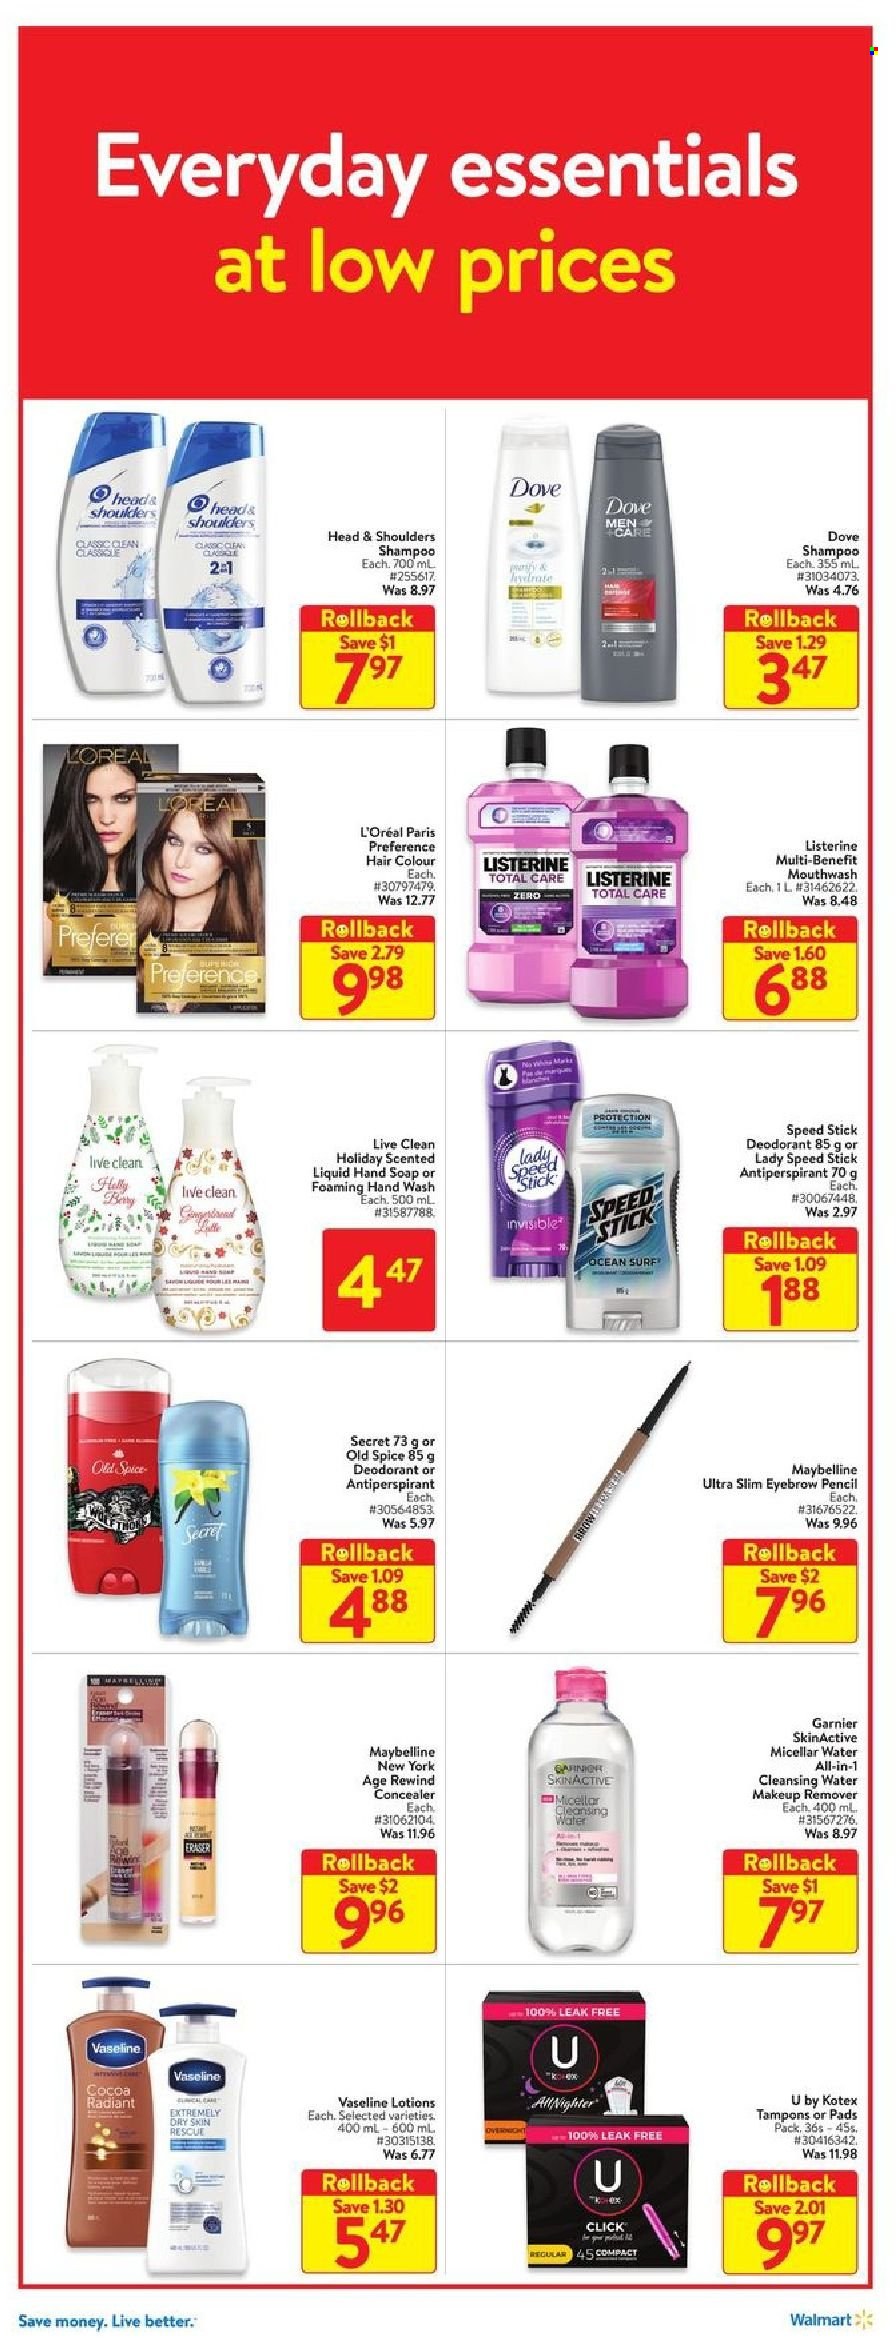 thumbnail - Walmart Flyer - September 23, 2021 - September 29, 2021 - Sales products - spice, hand soap, hand wash, Vaseline, soap, mouthwash, Kotex, tampons, L’Oréal, micellar water, hair color, anti-perspirant, Speed Stick, Sure, corrector, makeup remover, eraser, pencil, Dove, Garnier, Listerine, Maybelline, shampoo, Head & Shoulders, Old Spice, deodorant. Page 12.